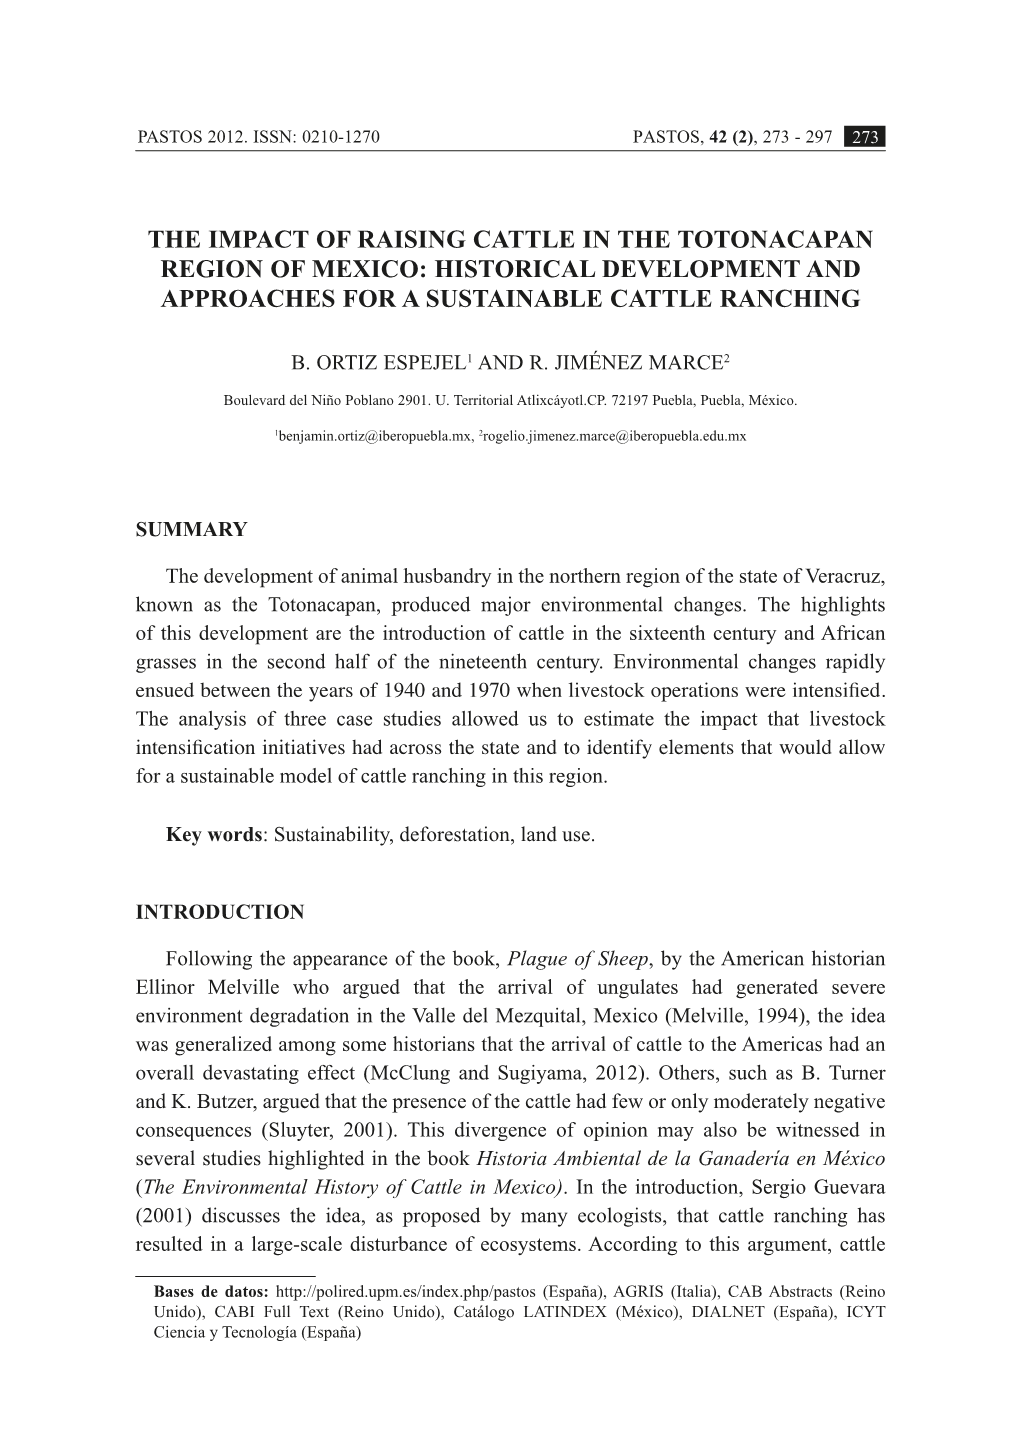 The Impact of Raising Cattle in the Totonacapan Region of Mexico: Historical Development and Approaches for a Sustainable Cattle Ranching